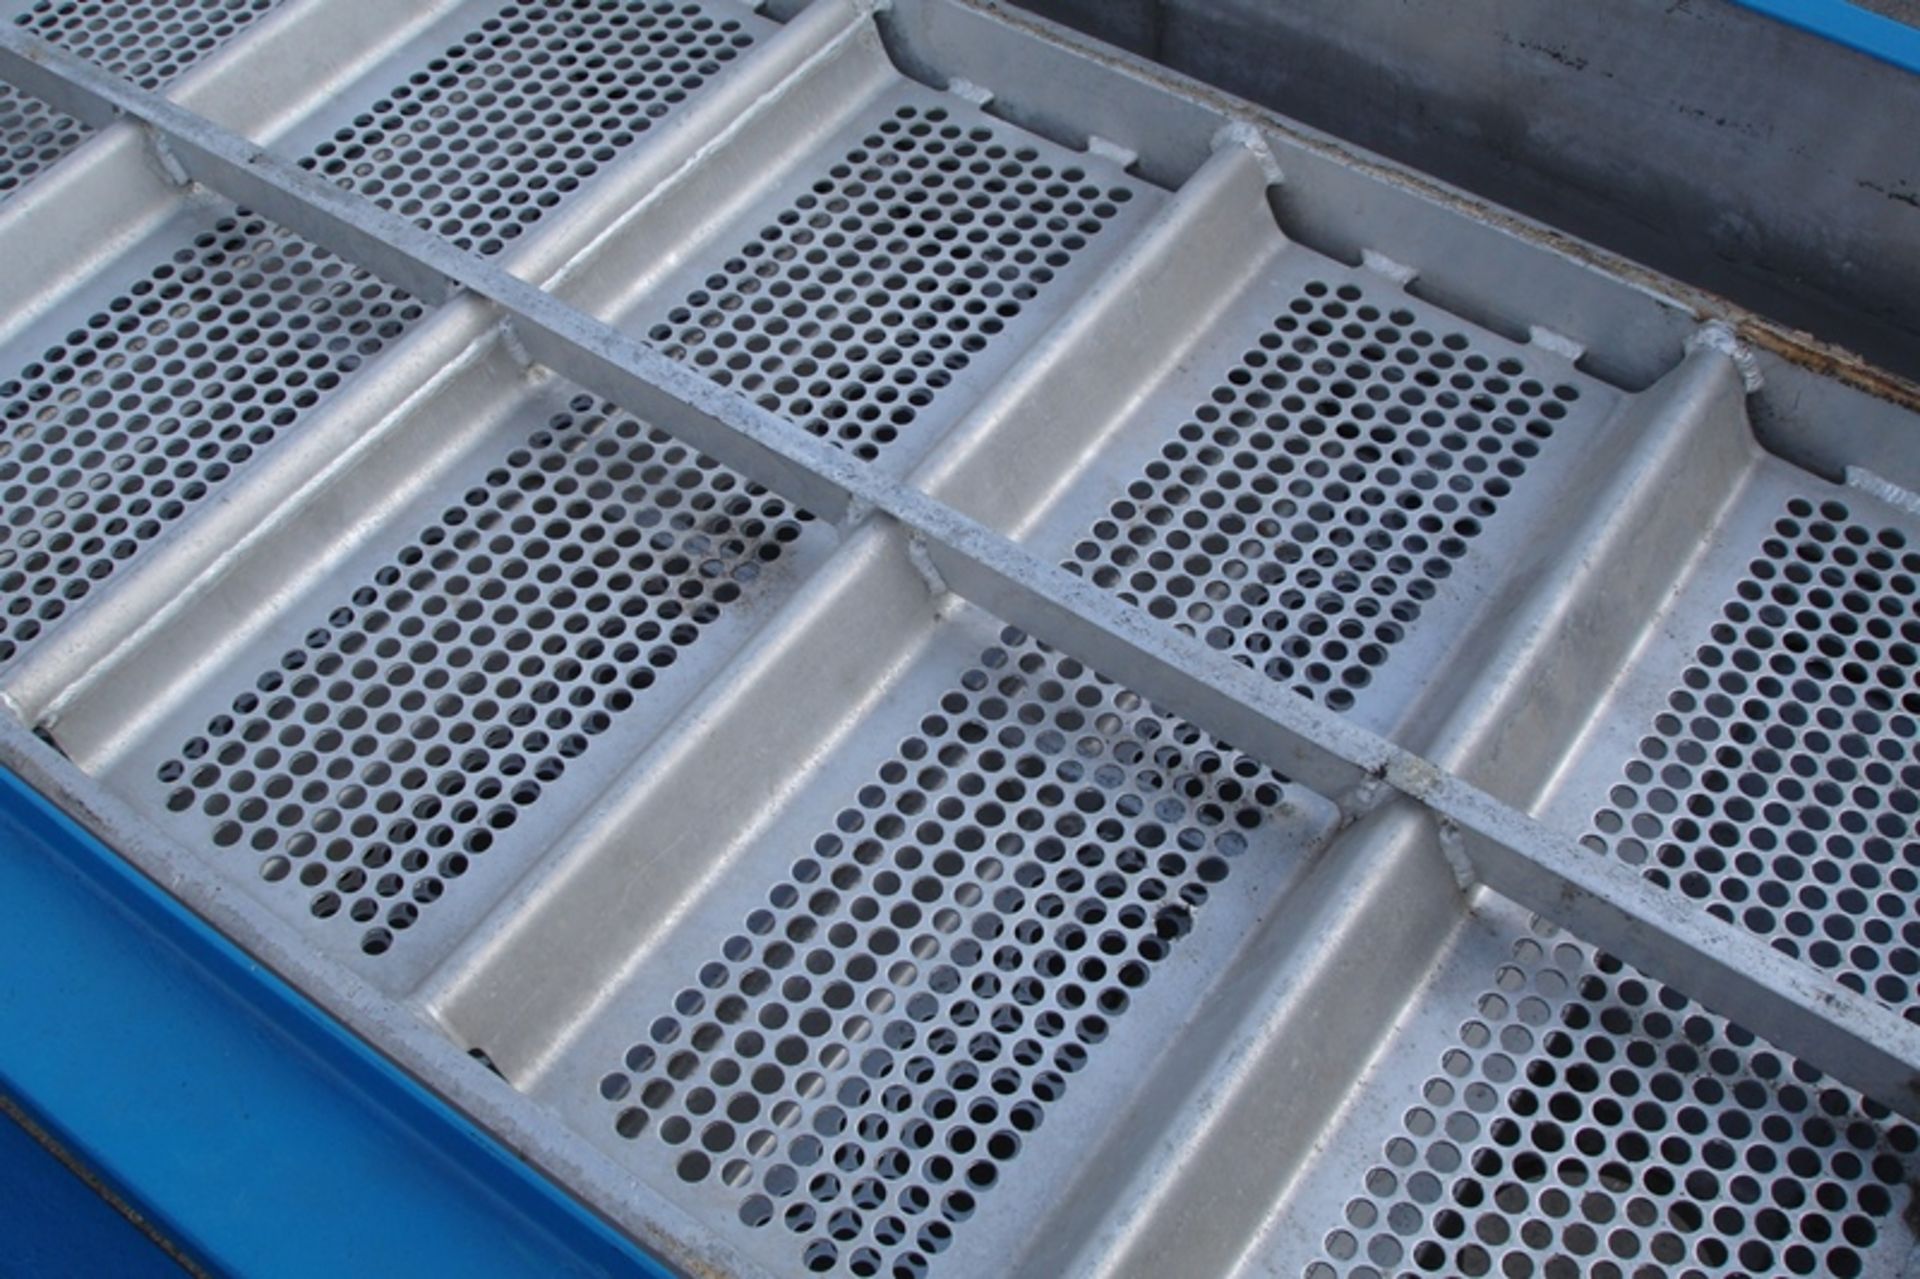 Rotex Rotary Sieve/screen on platform - Image 5 of 8